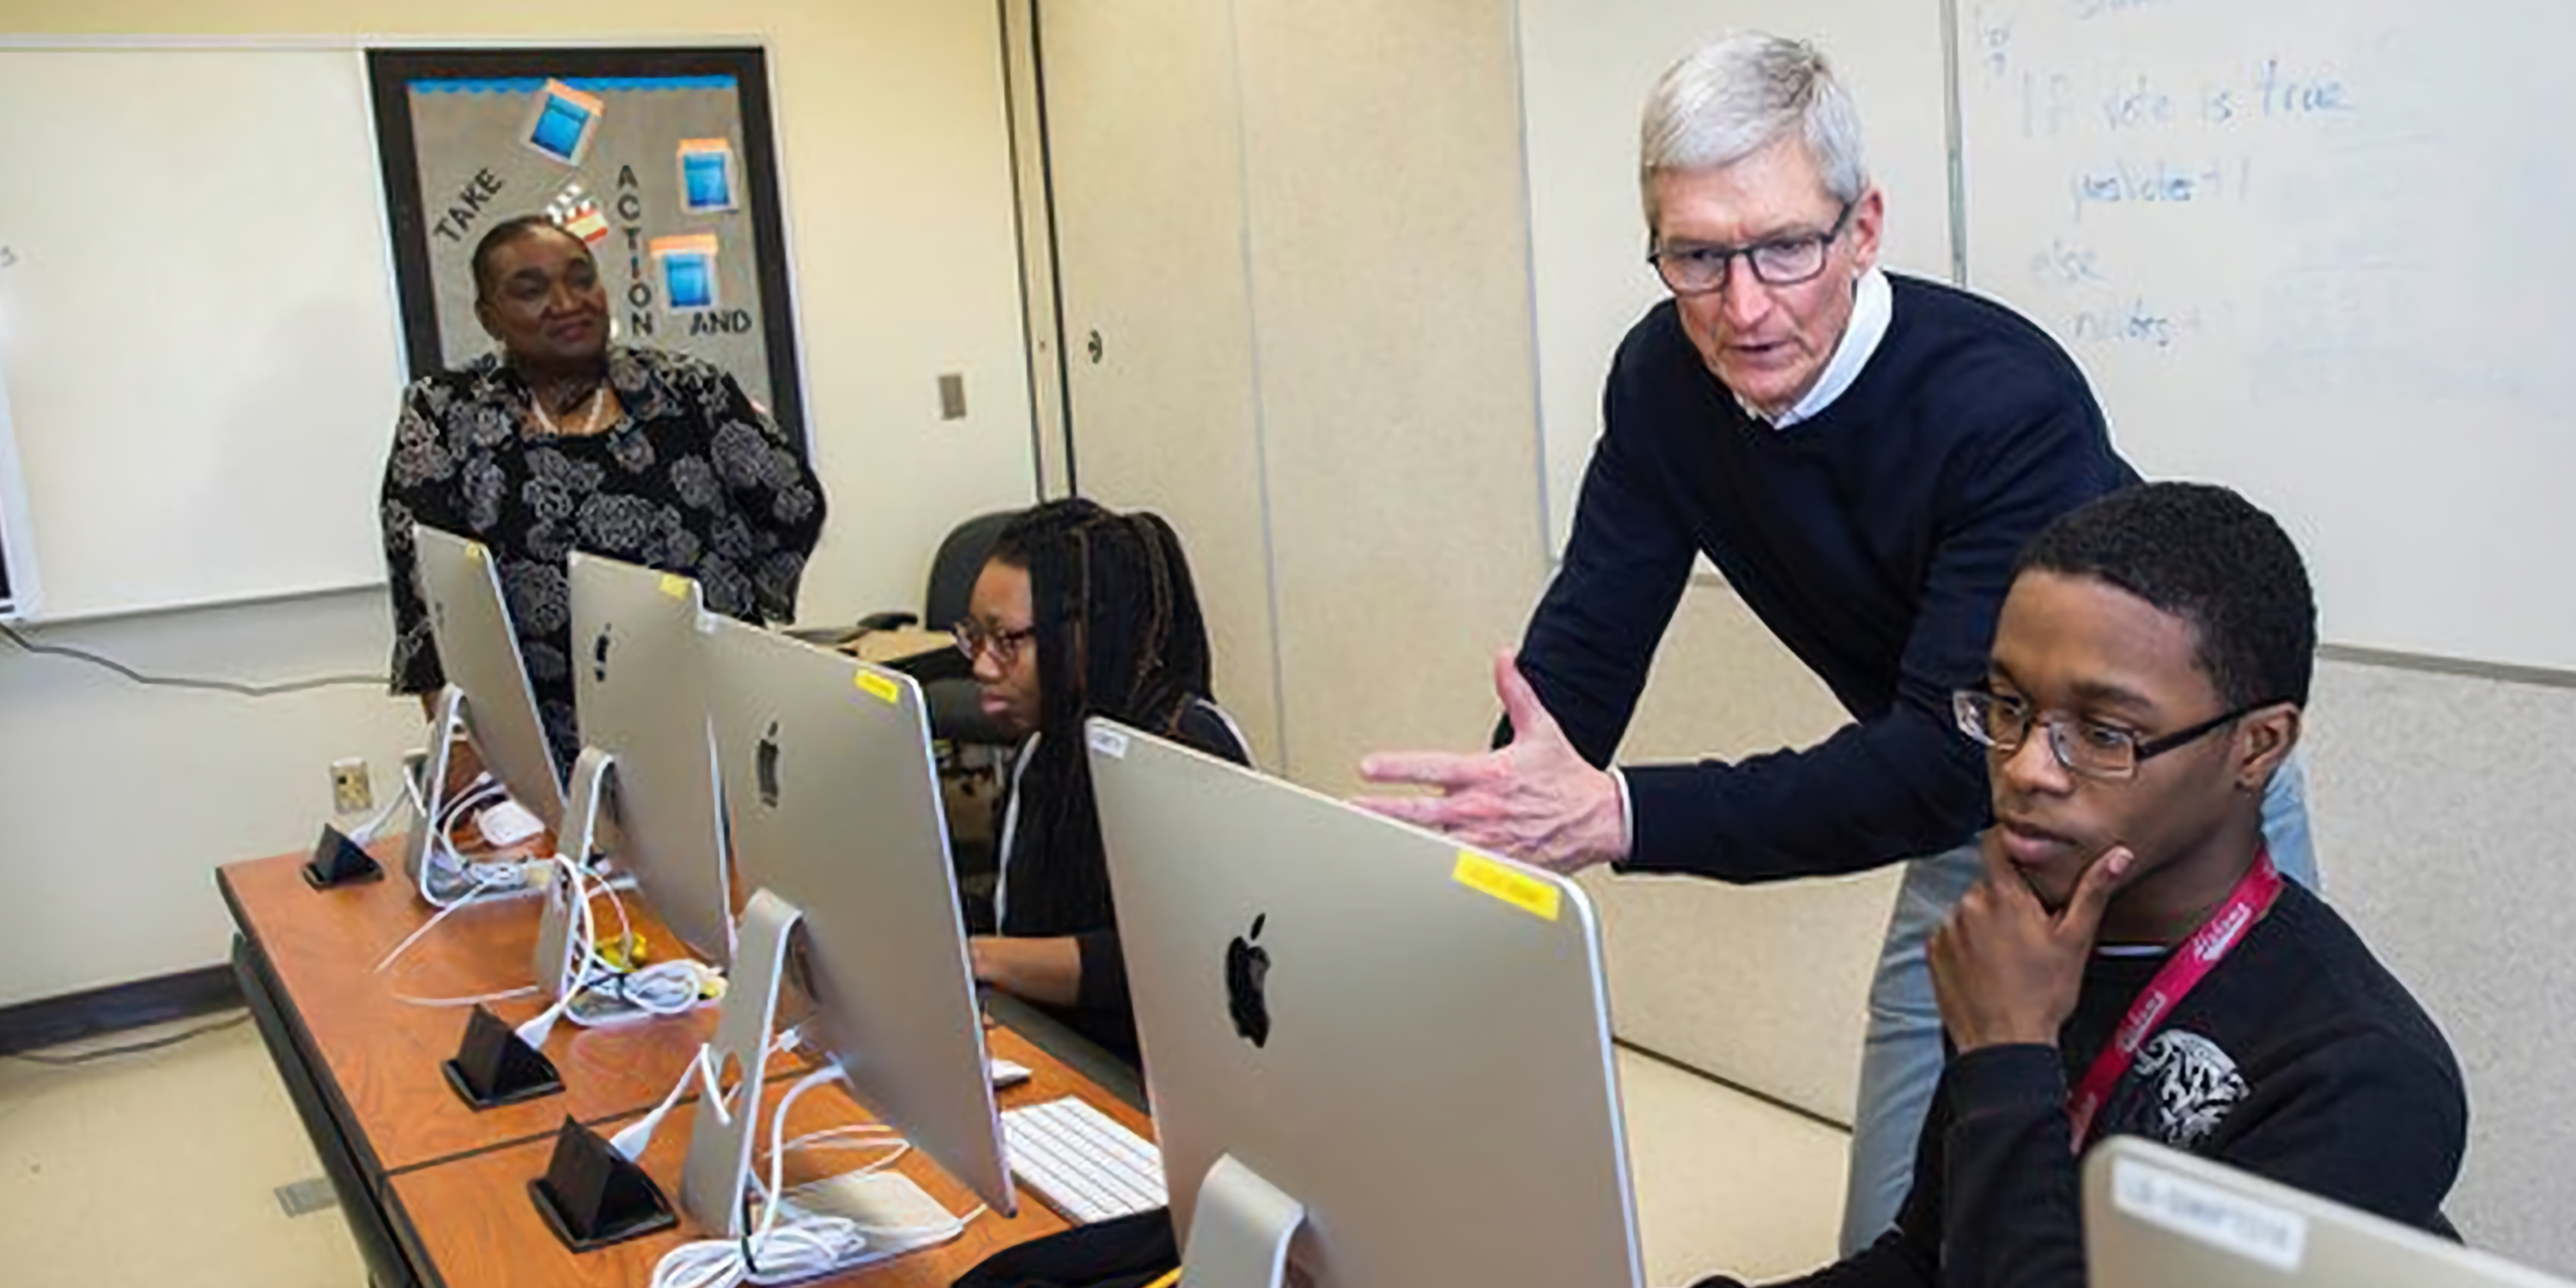 Tim Cook wants to oversee one more major product before stepping down